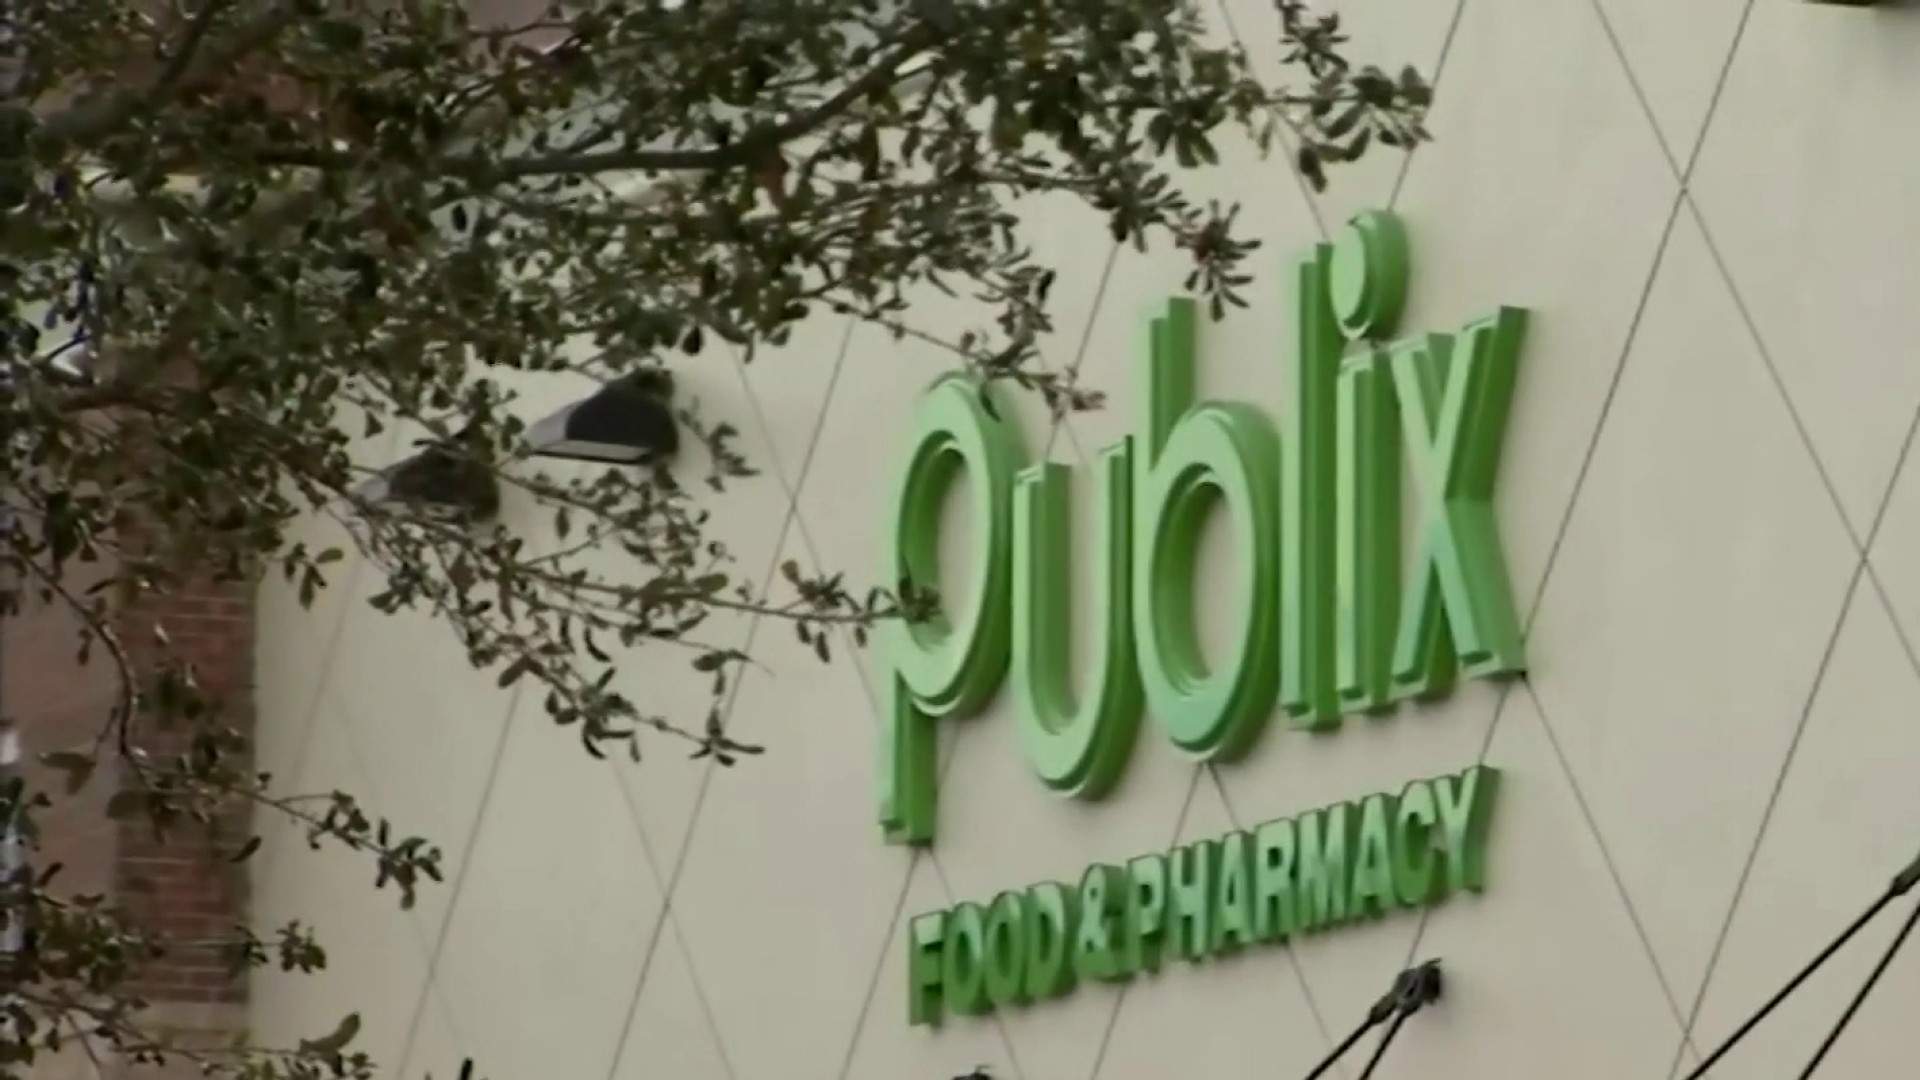 Publix says the remaining doses of the COVID-19 vaccine will go to employees